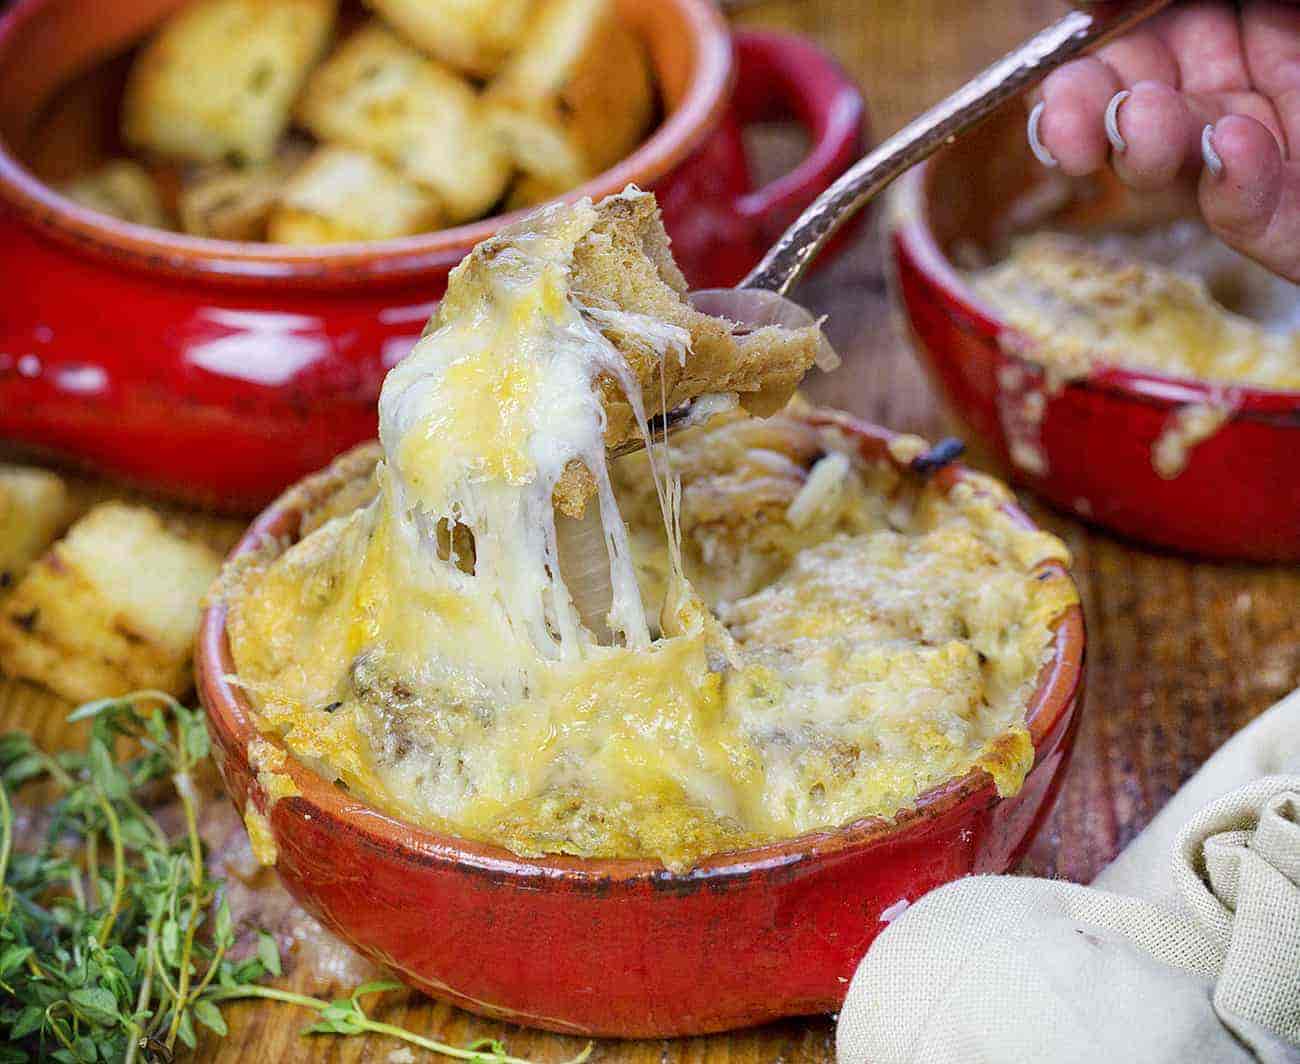 A Gourmet Twist on French Onion Soup